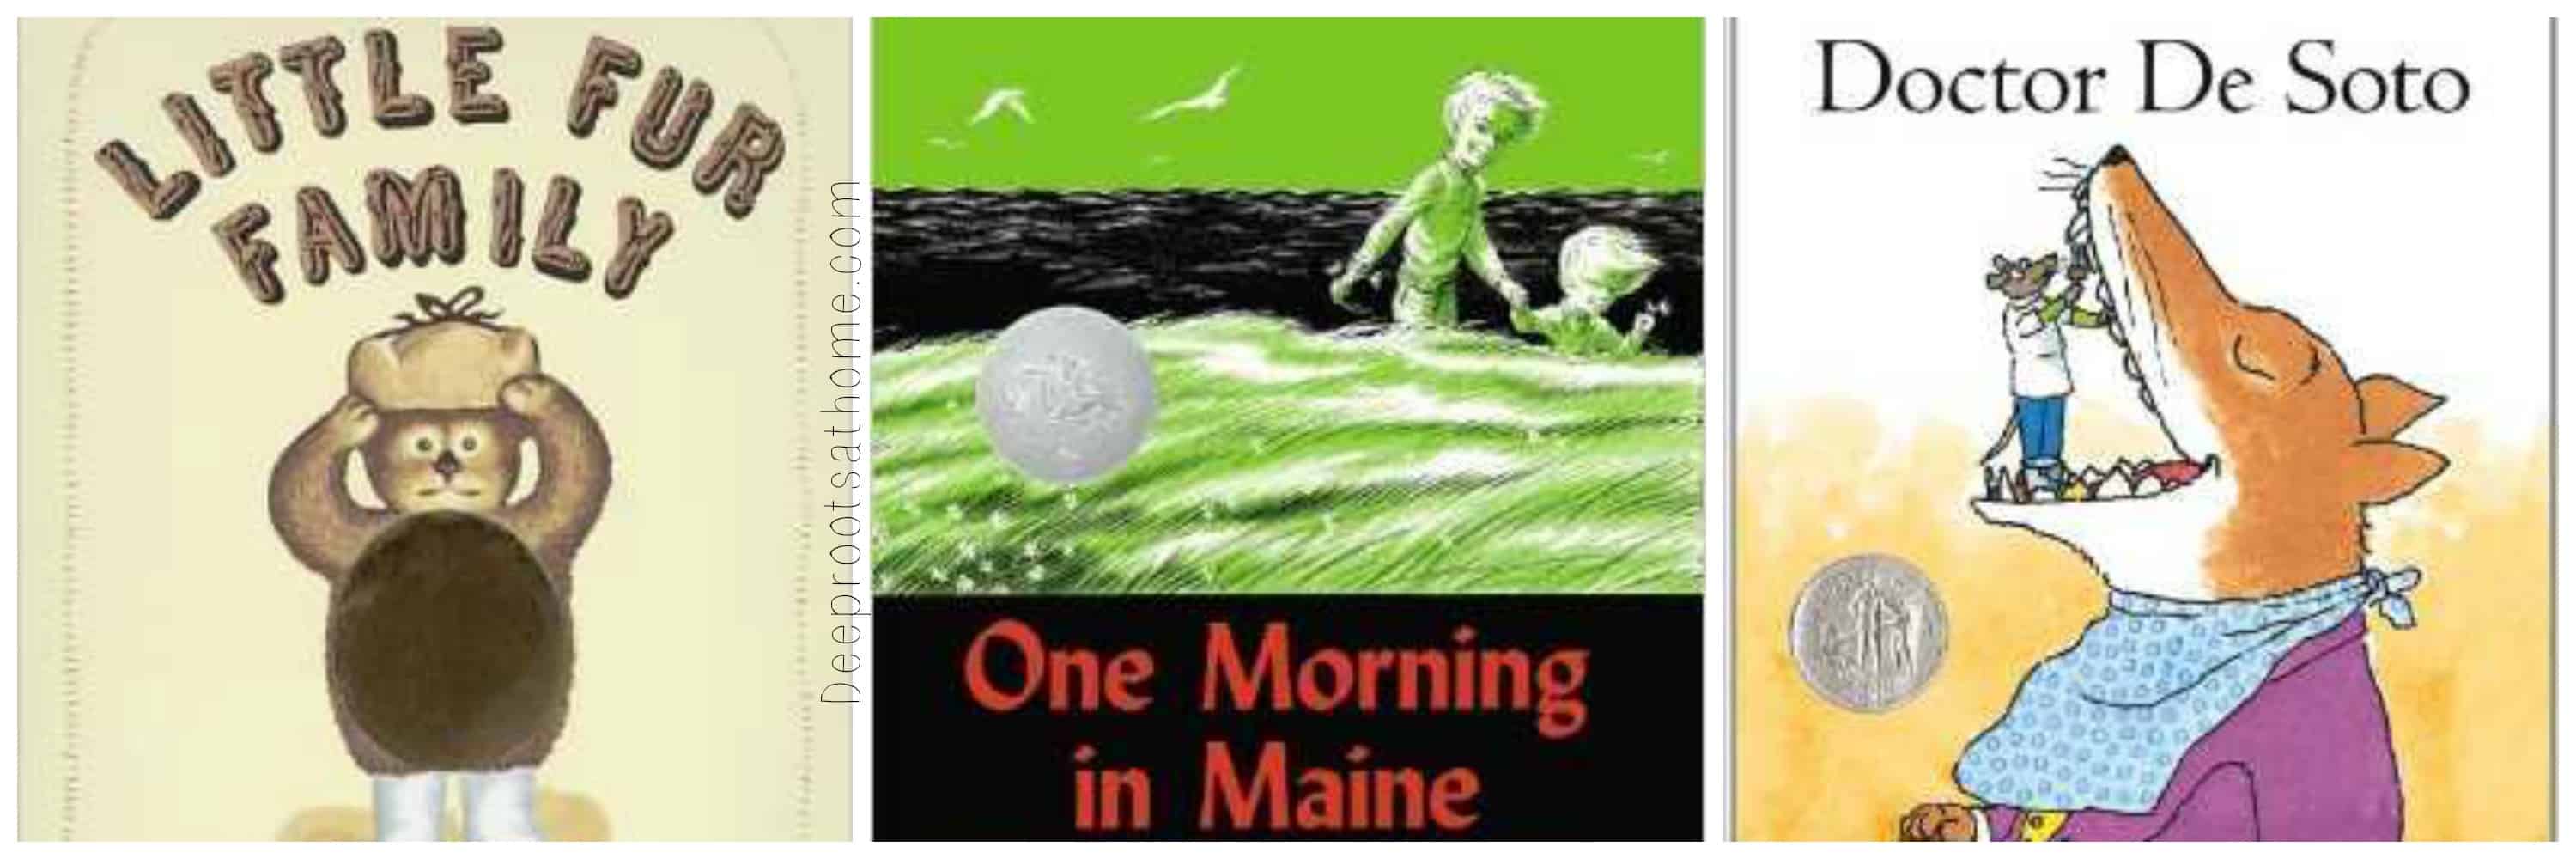 3 books: The Little fur Family, One Morning in Maine, and Doctor De Soto by Robert McCloskey.